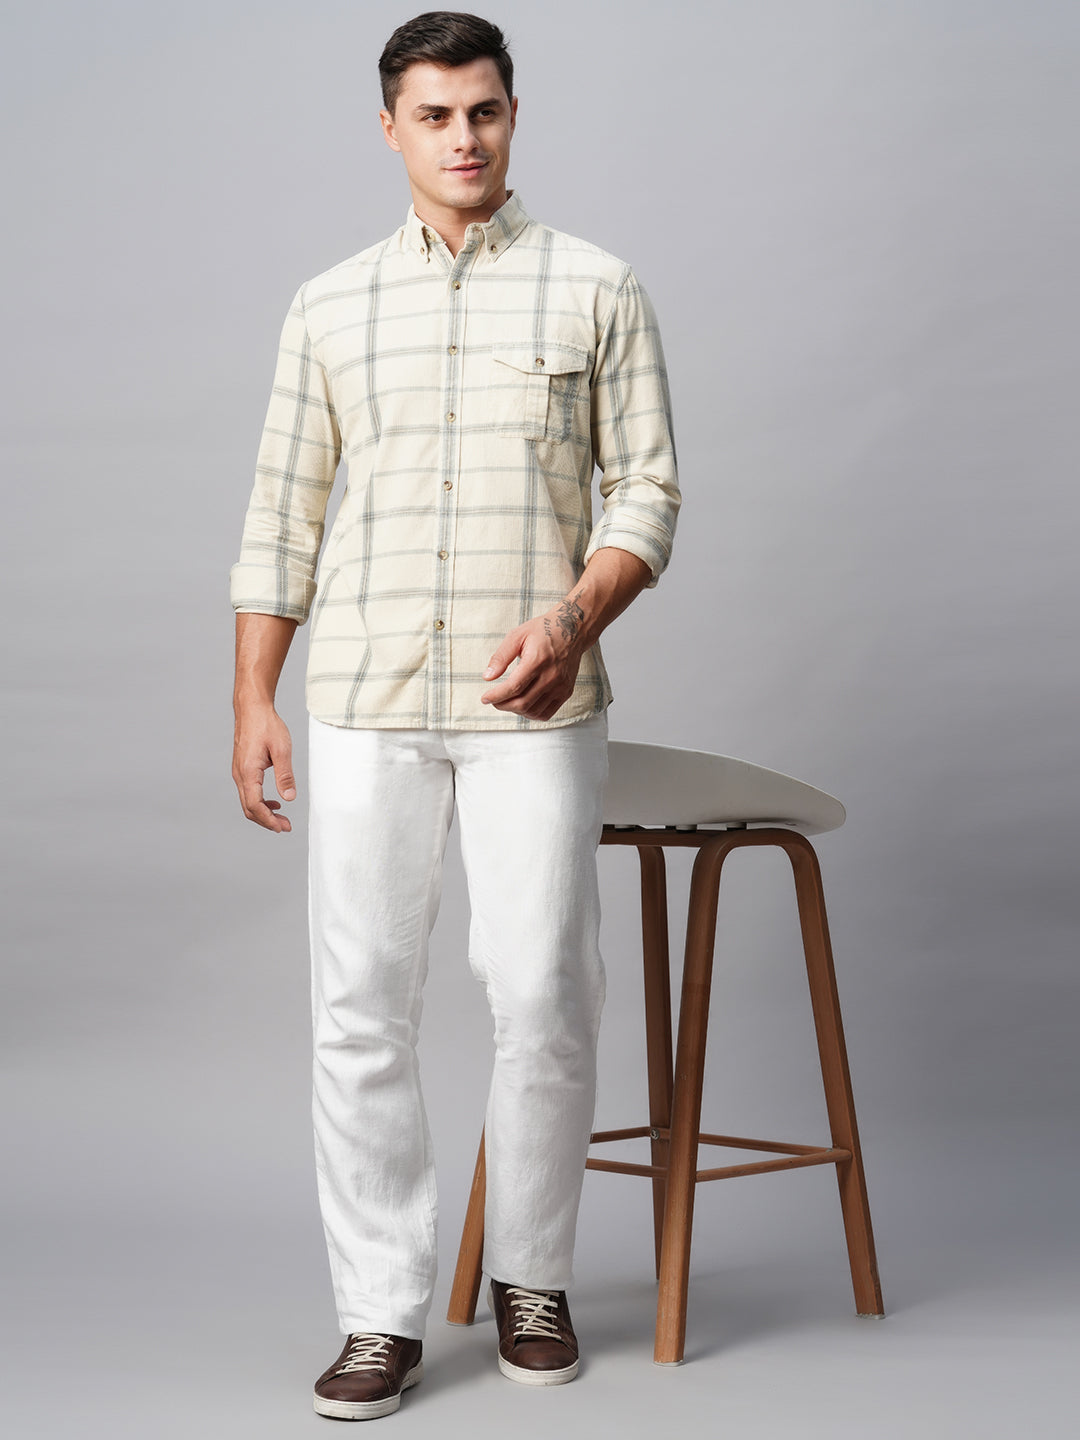 Men's Offwhite Cotton Regular Fit Checked Shirt